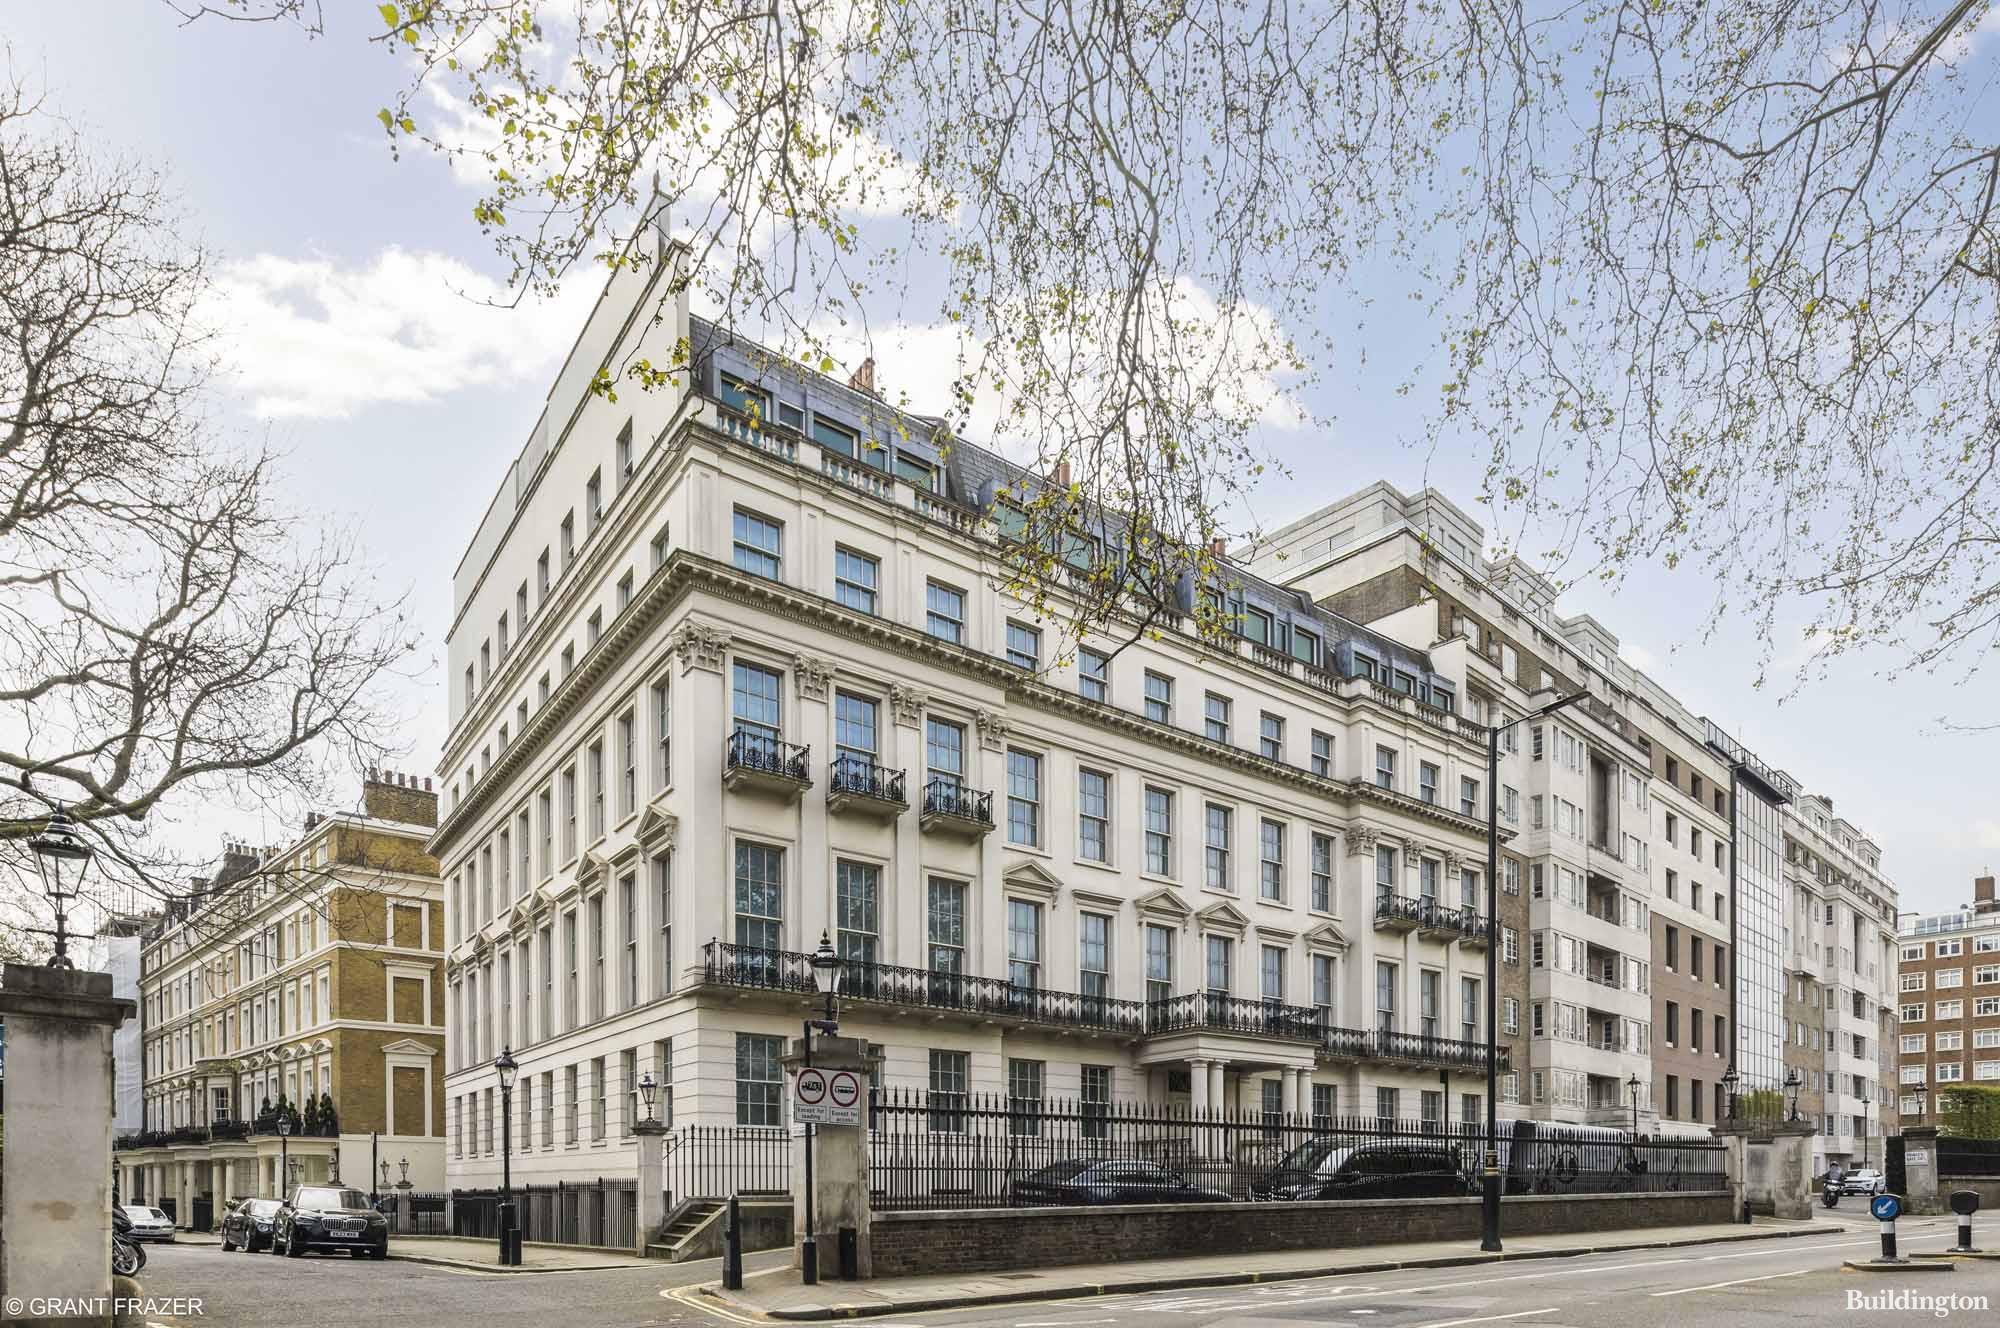 2-8a Rutland Gate building £225 million deal by Sotheby's International Realty